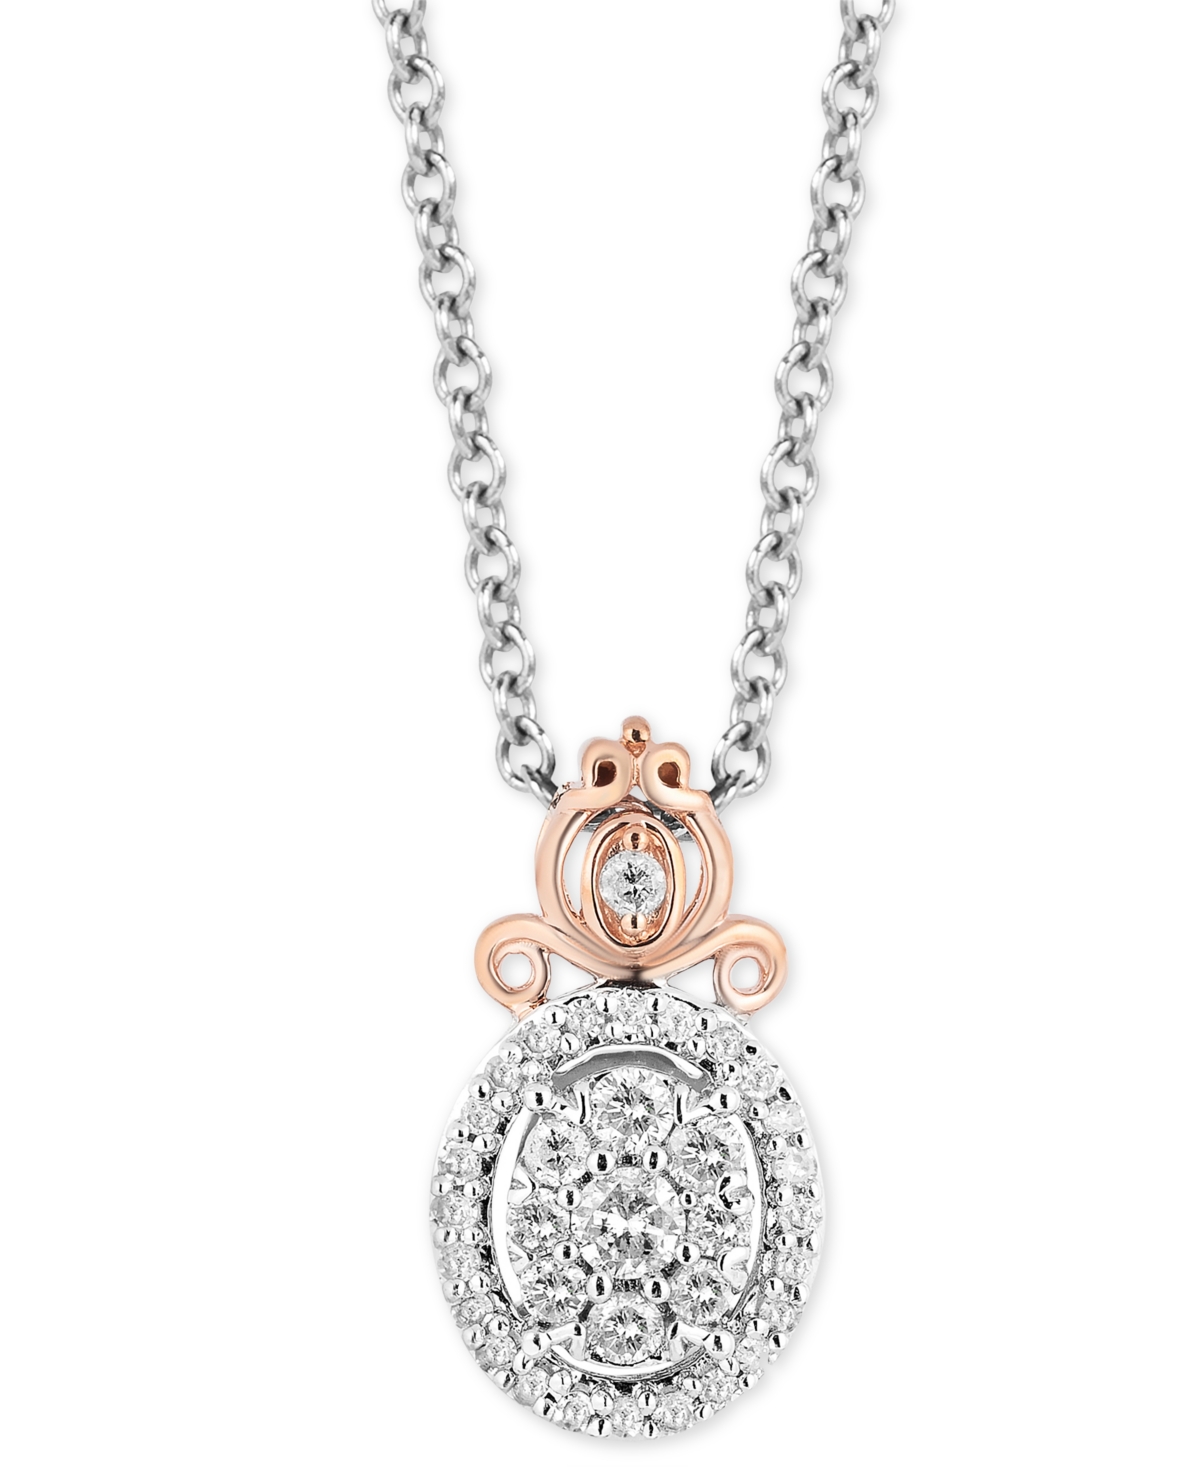 Diamond Cinderella Carriage Pendant Necklace (1/5 ct. t.w.) in Sterling Silver & 14k Rose Gold-Plate, 16" + 2" extender